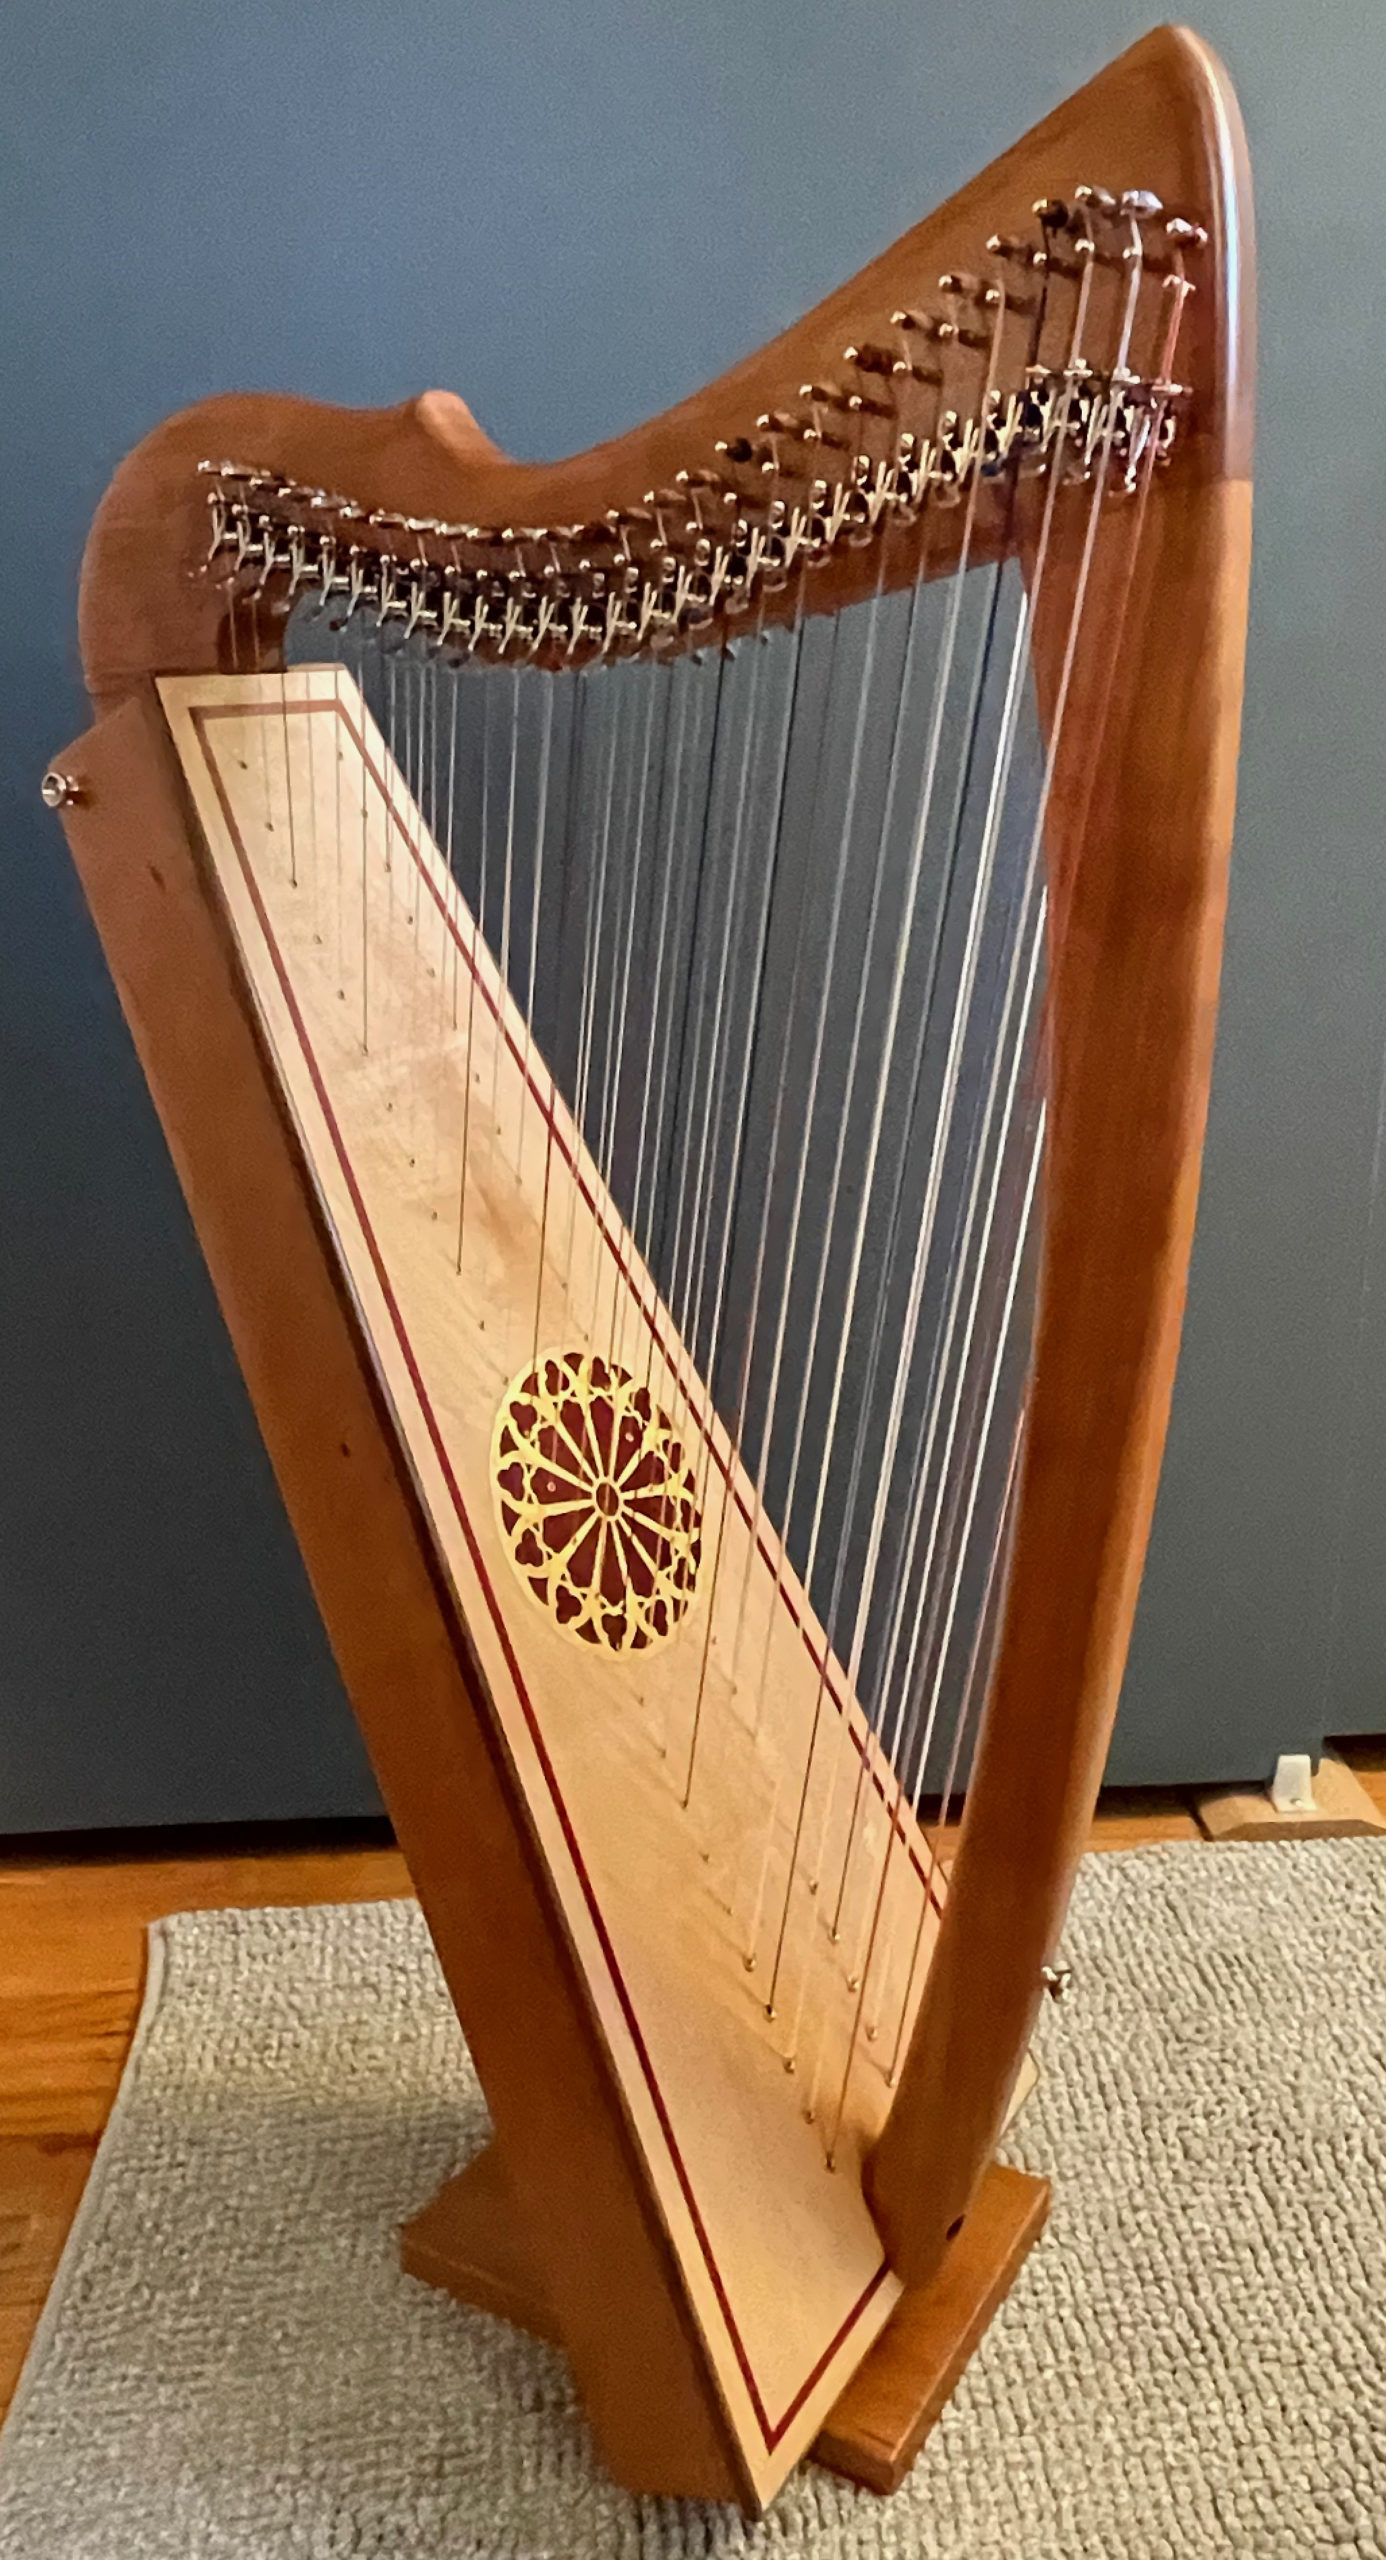 Rees Double Morgan Meghan double-strung harp from the right side